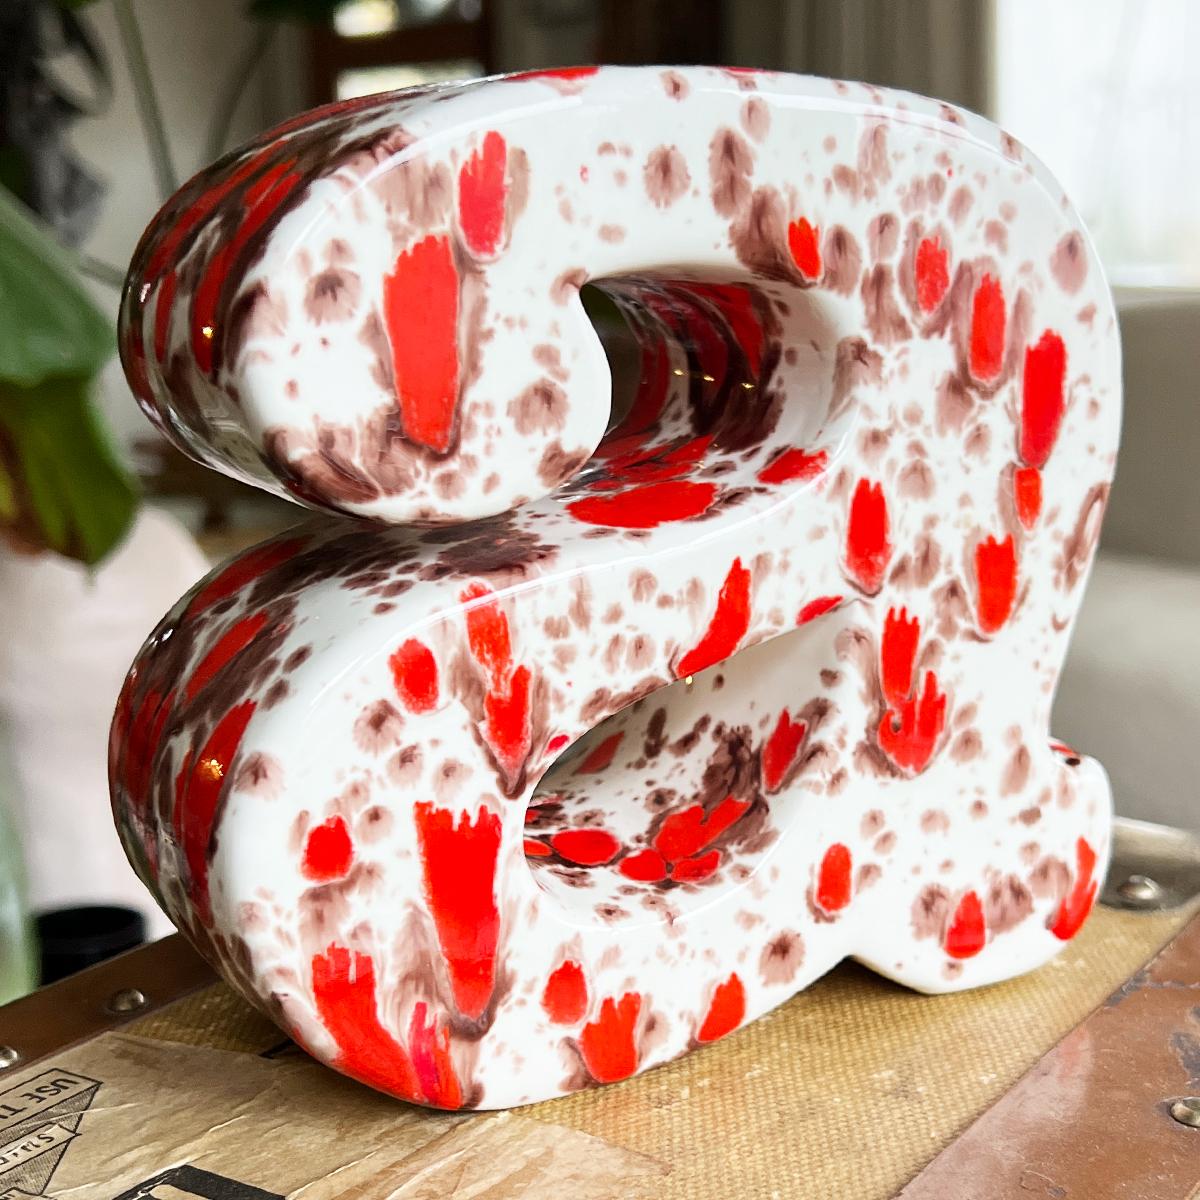 American Ceramic Lowercase Letter A Splatter Painted Bookend in Orange and Brown - 1981 For Sale